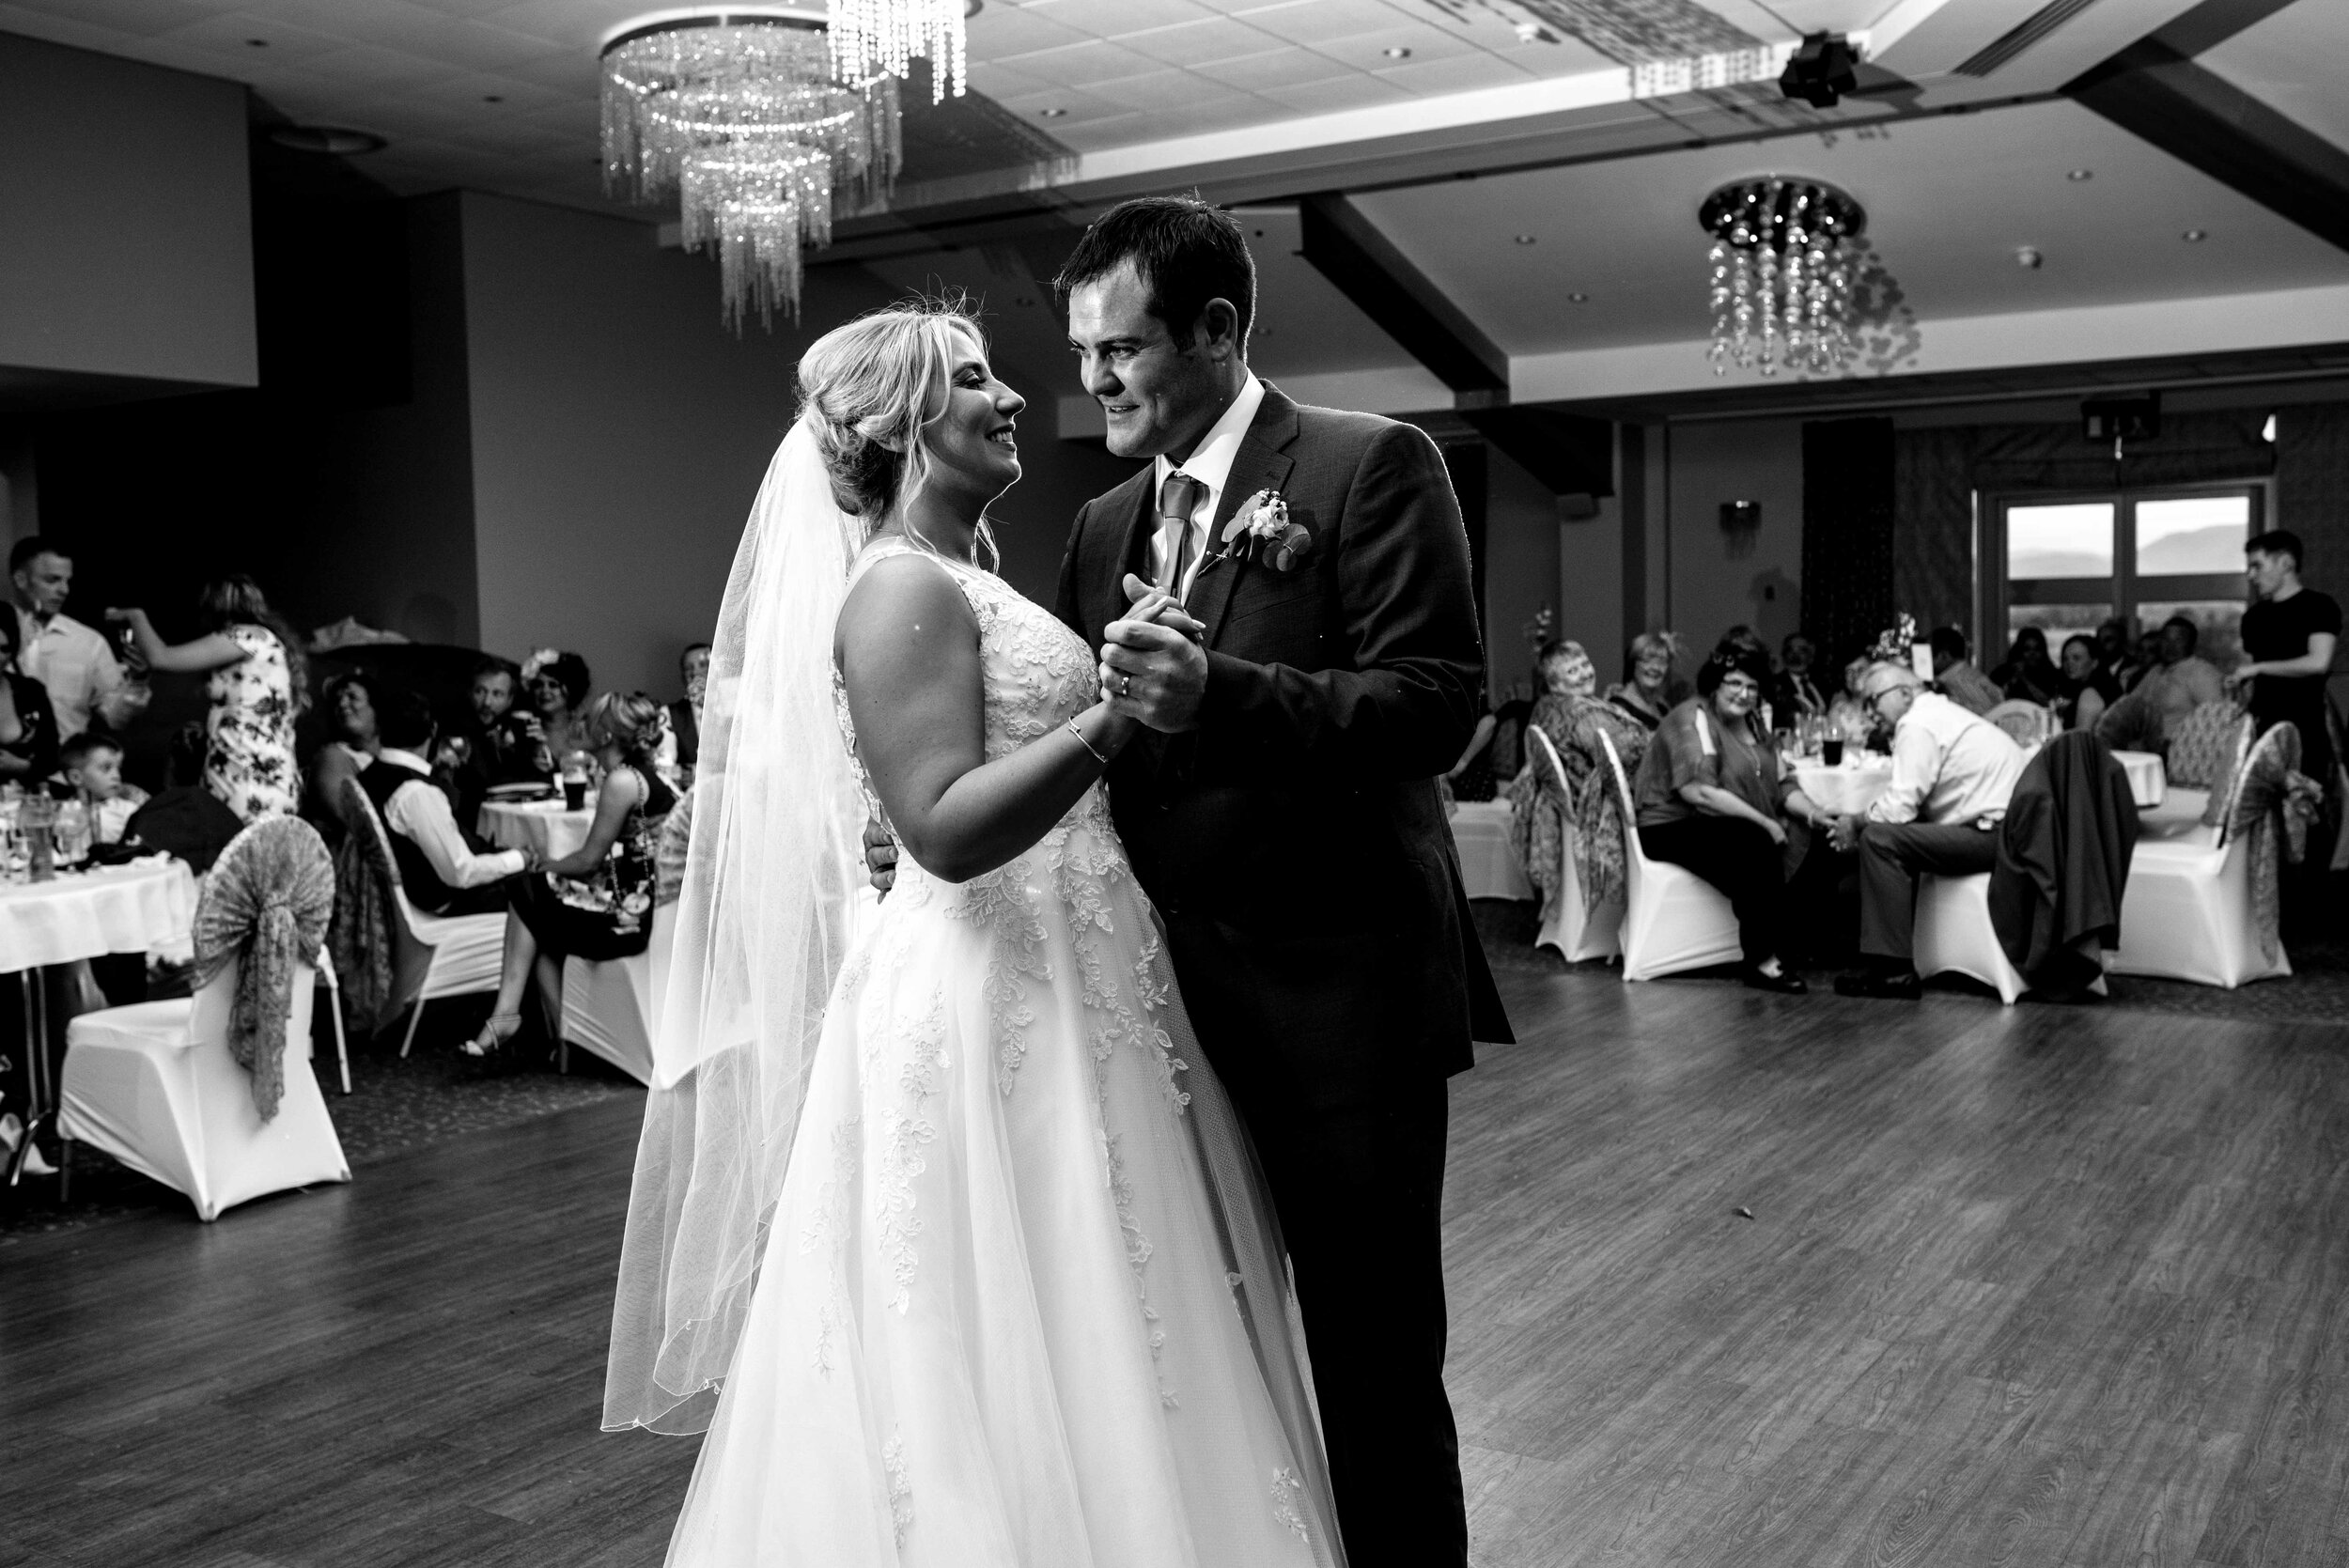 Bride and grooms first dance in black and white